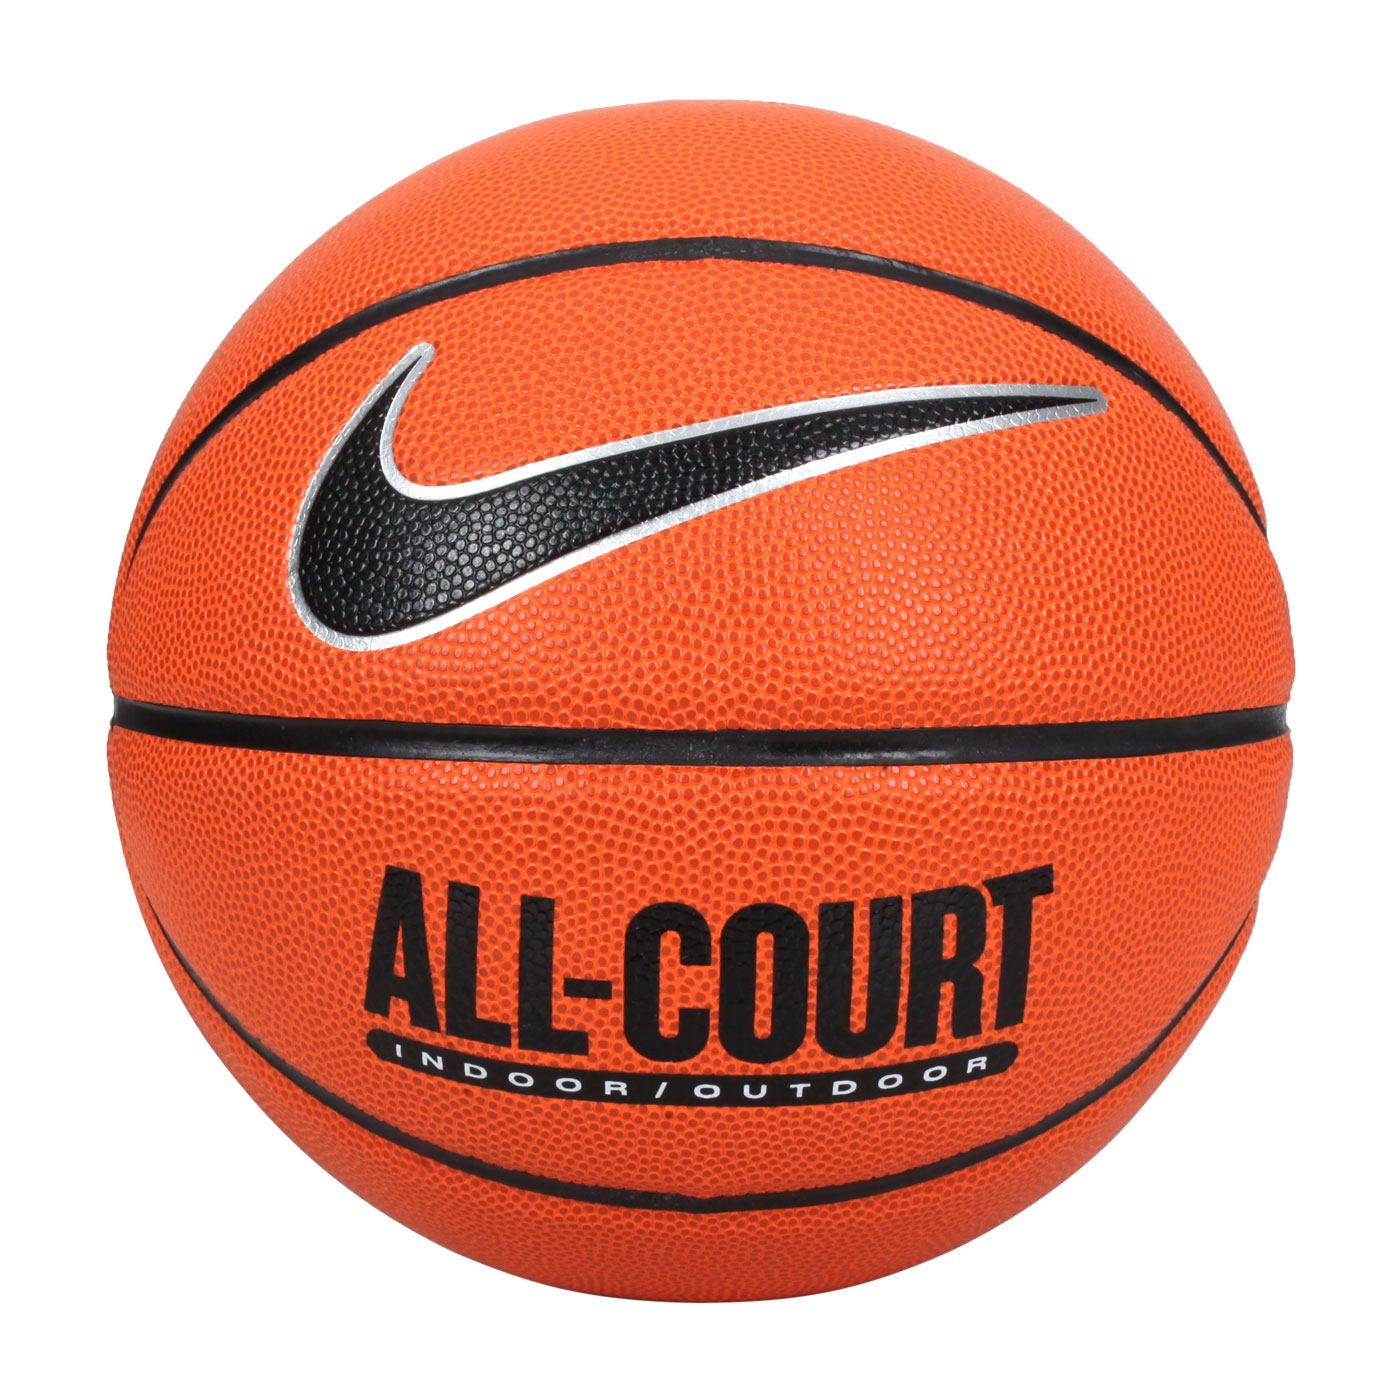 NIKE EVERTDAY ALL COURT 8P 7號籃球 N100436985507